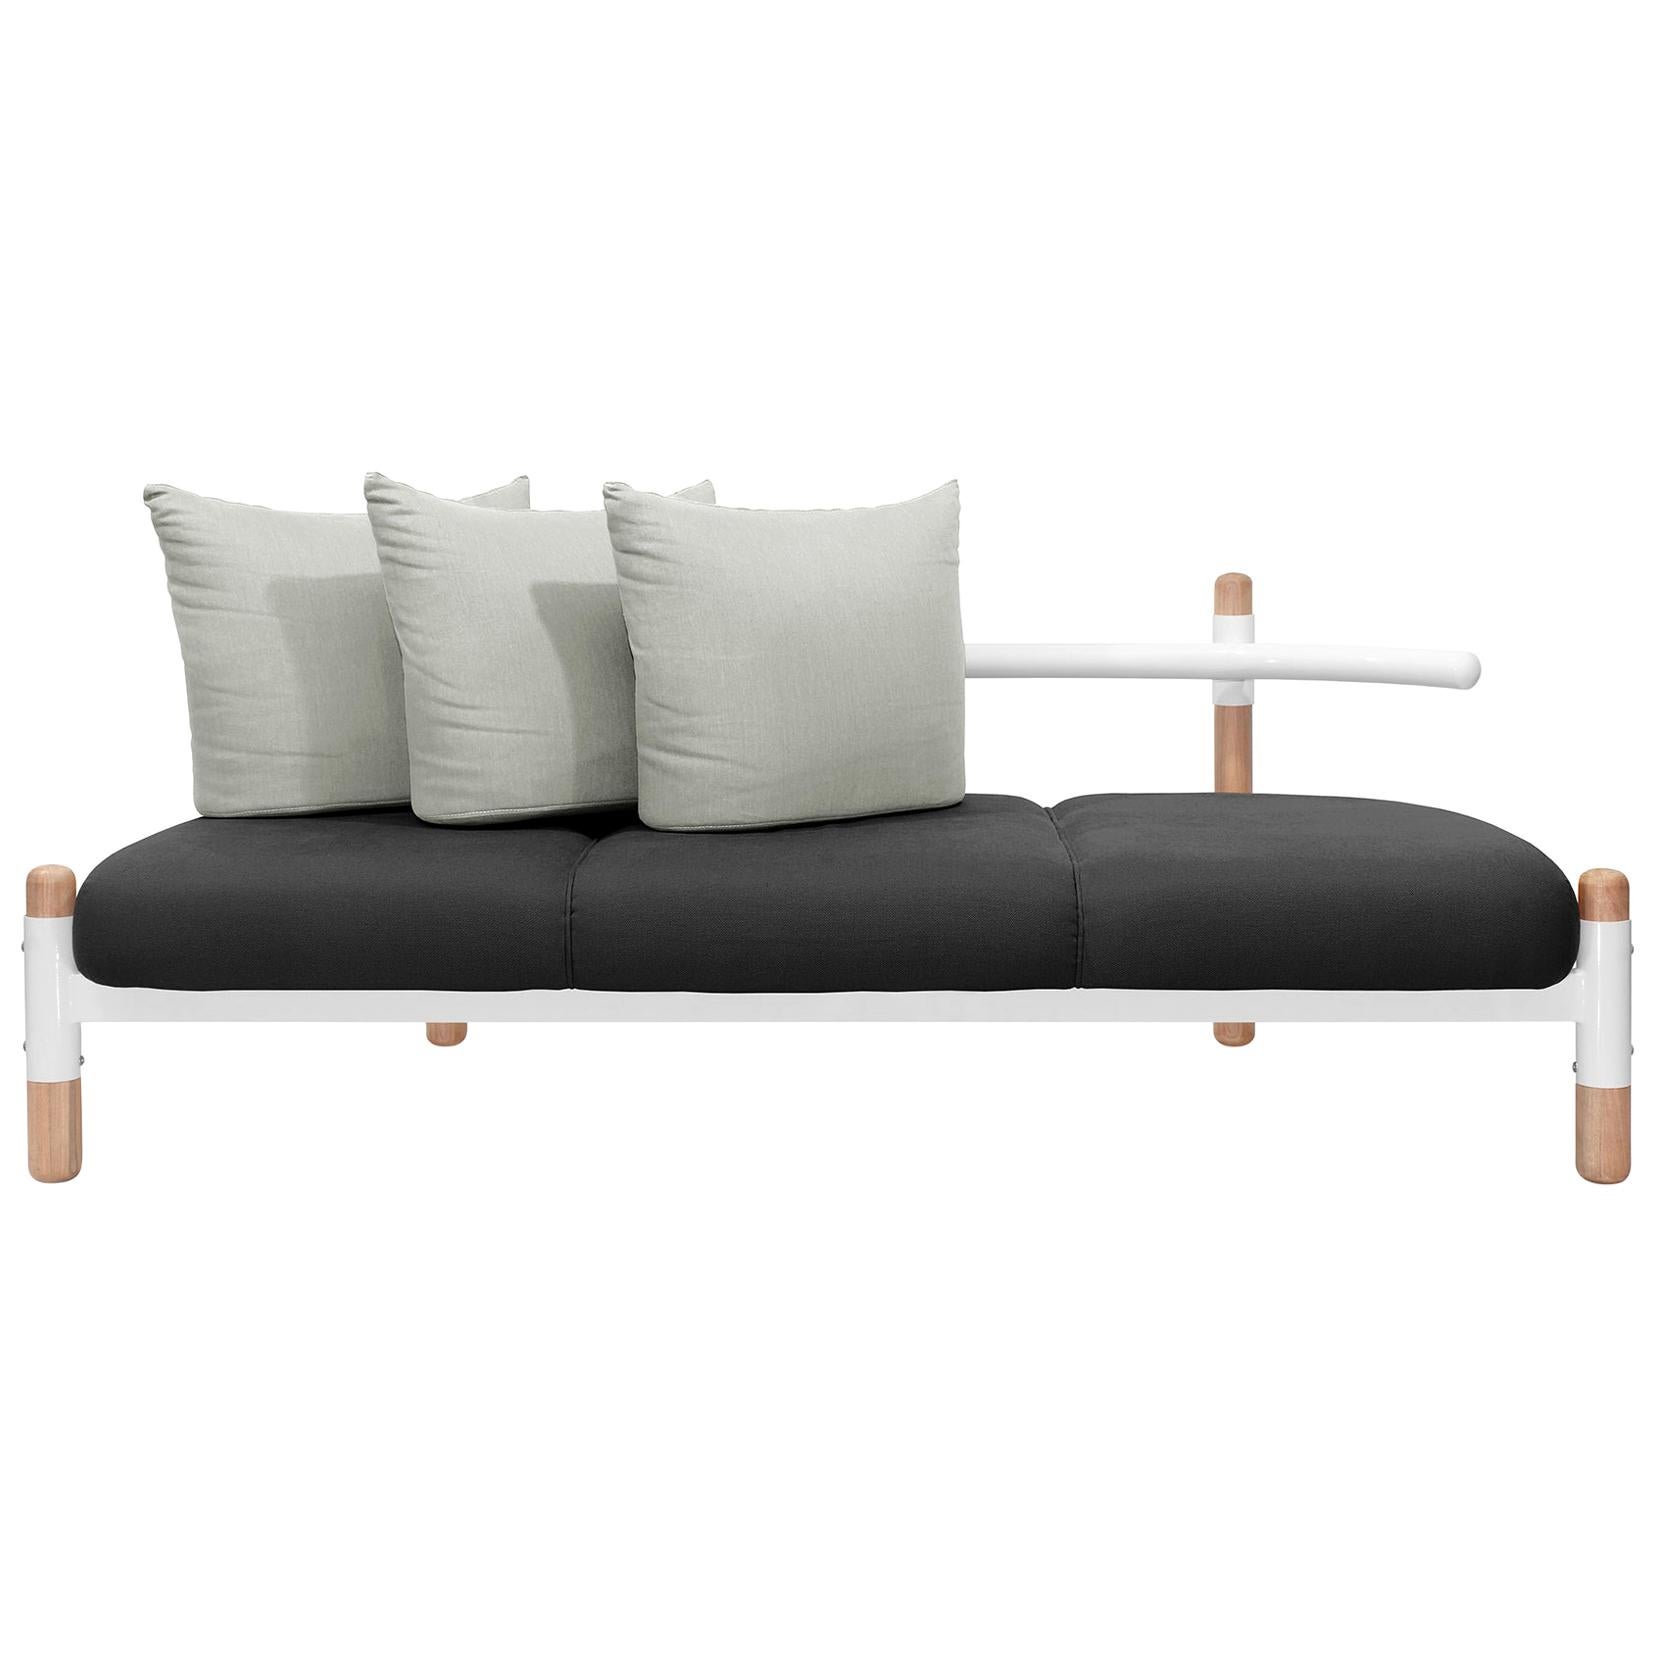 Black PK15 Three-Seat Sofa, Carbon Steel Structure & Wood Legs by Paulo Kobylka For Sale